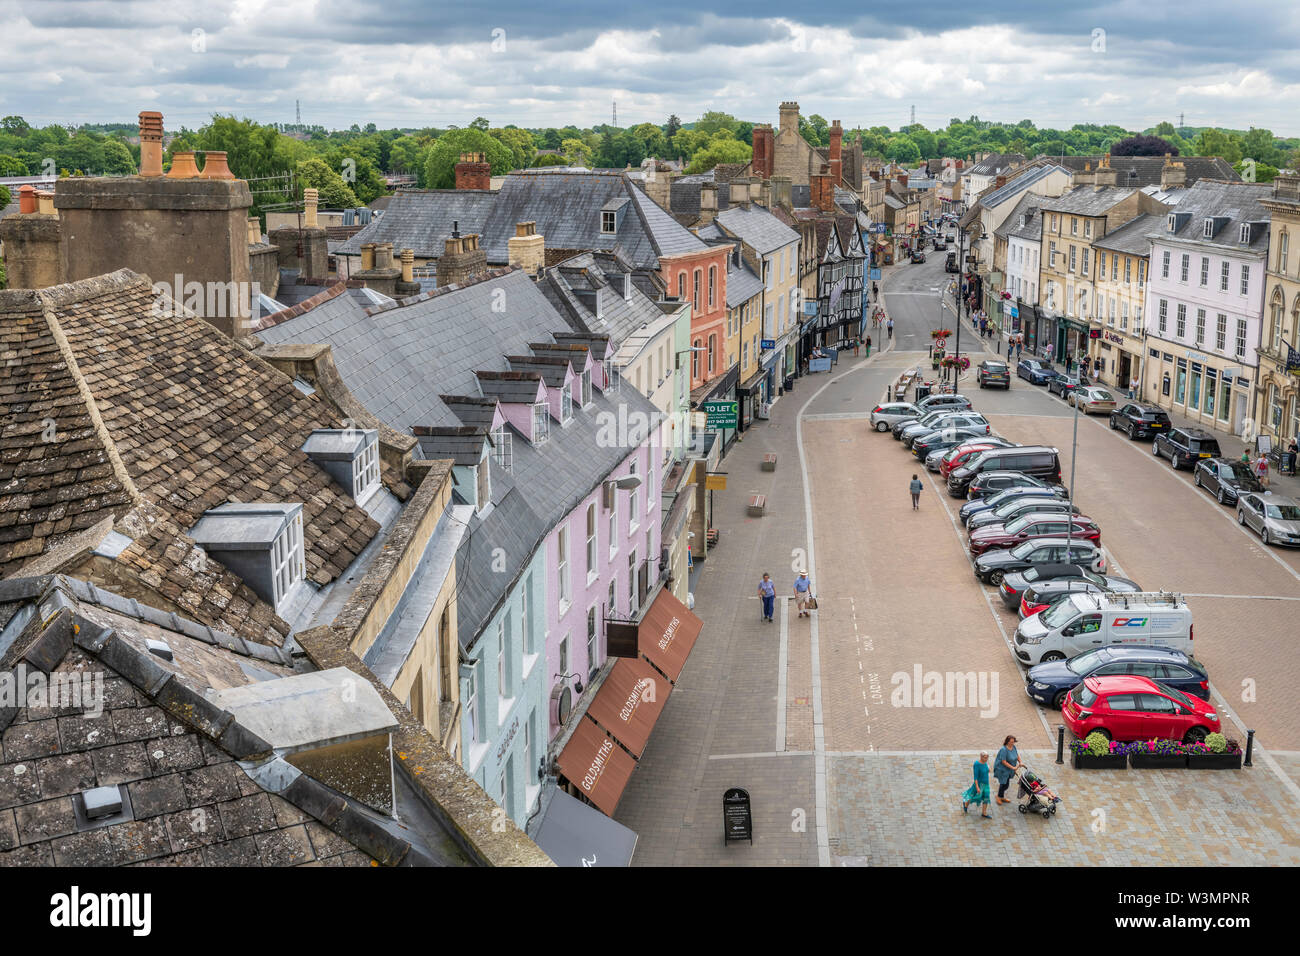 Cirencester, Gloucestershire. The new pedestrian layout of Cirencester Marketplace as seen from St John the Baptist Church roof. Stock Photo